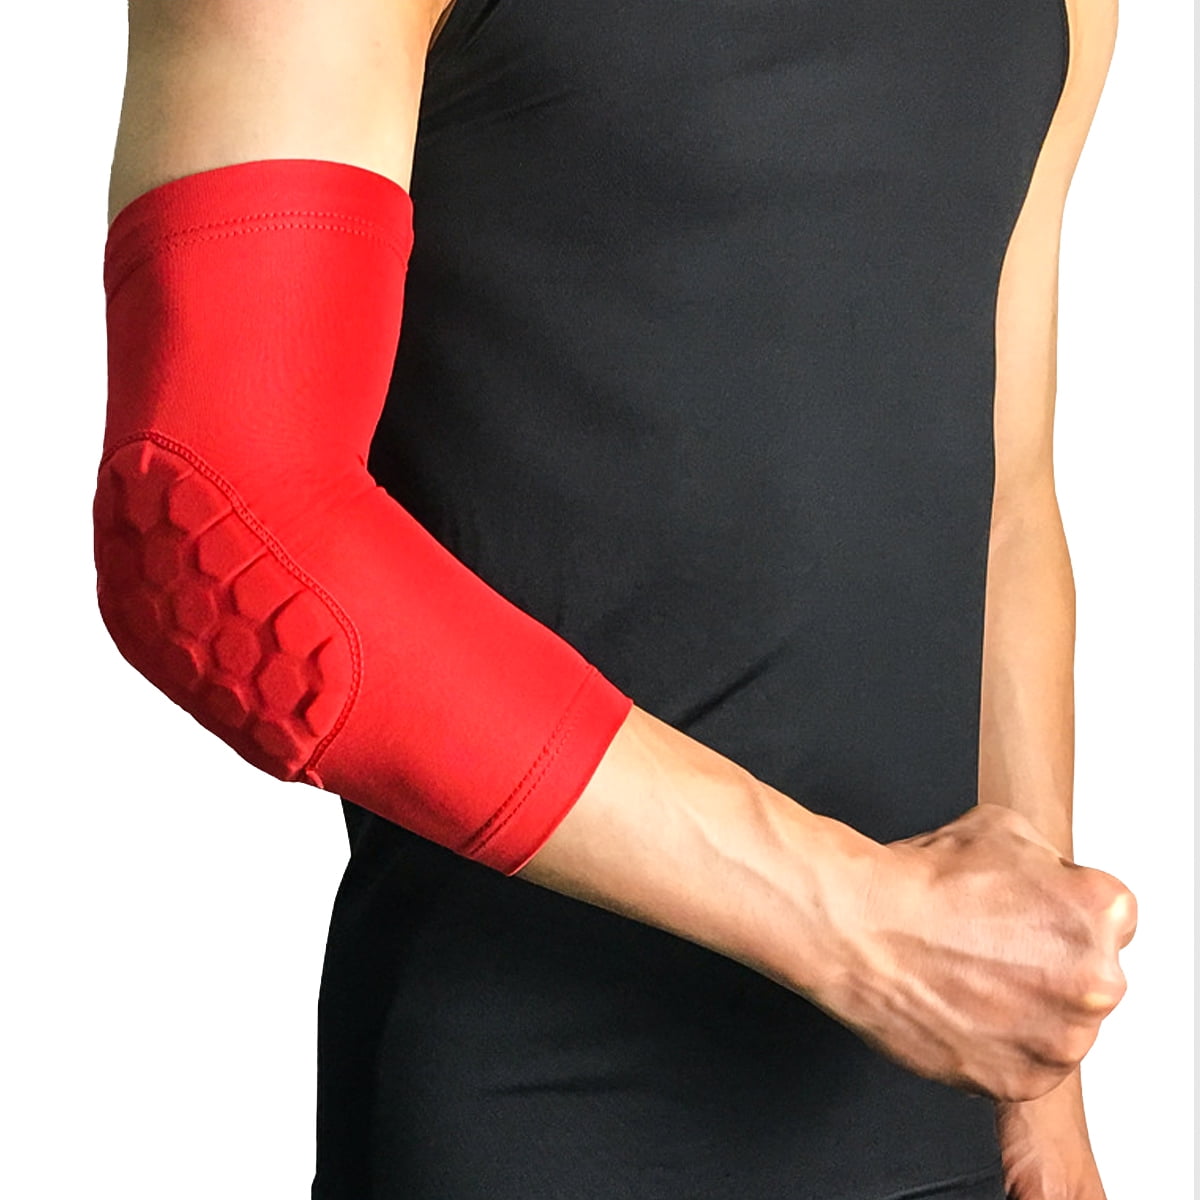 Details about   Sport Arm Guard Cellular Anti‑collision Elbow Guard Fitness Protective Gear 